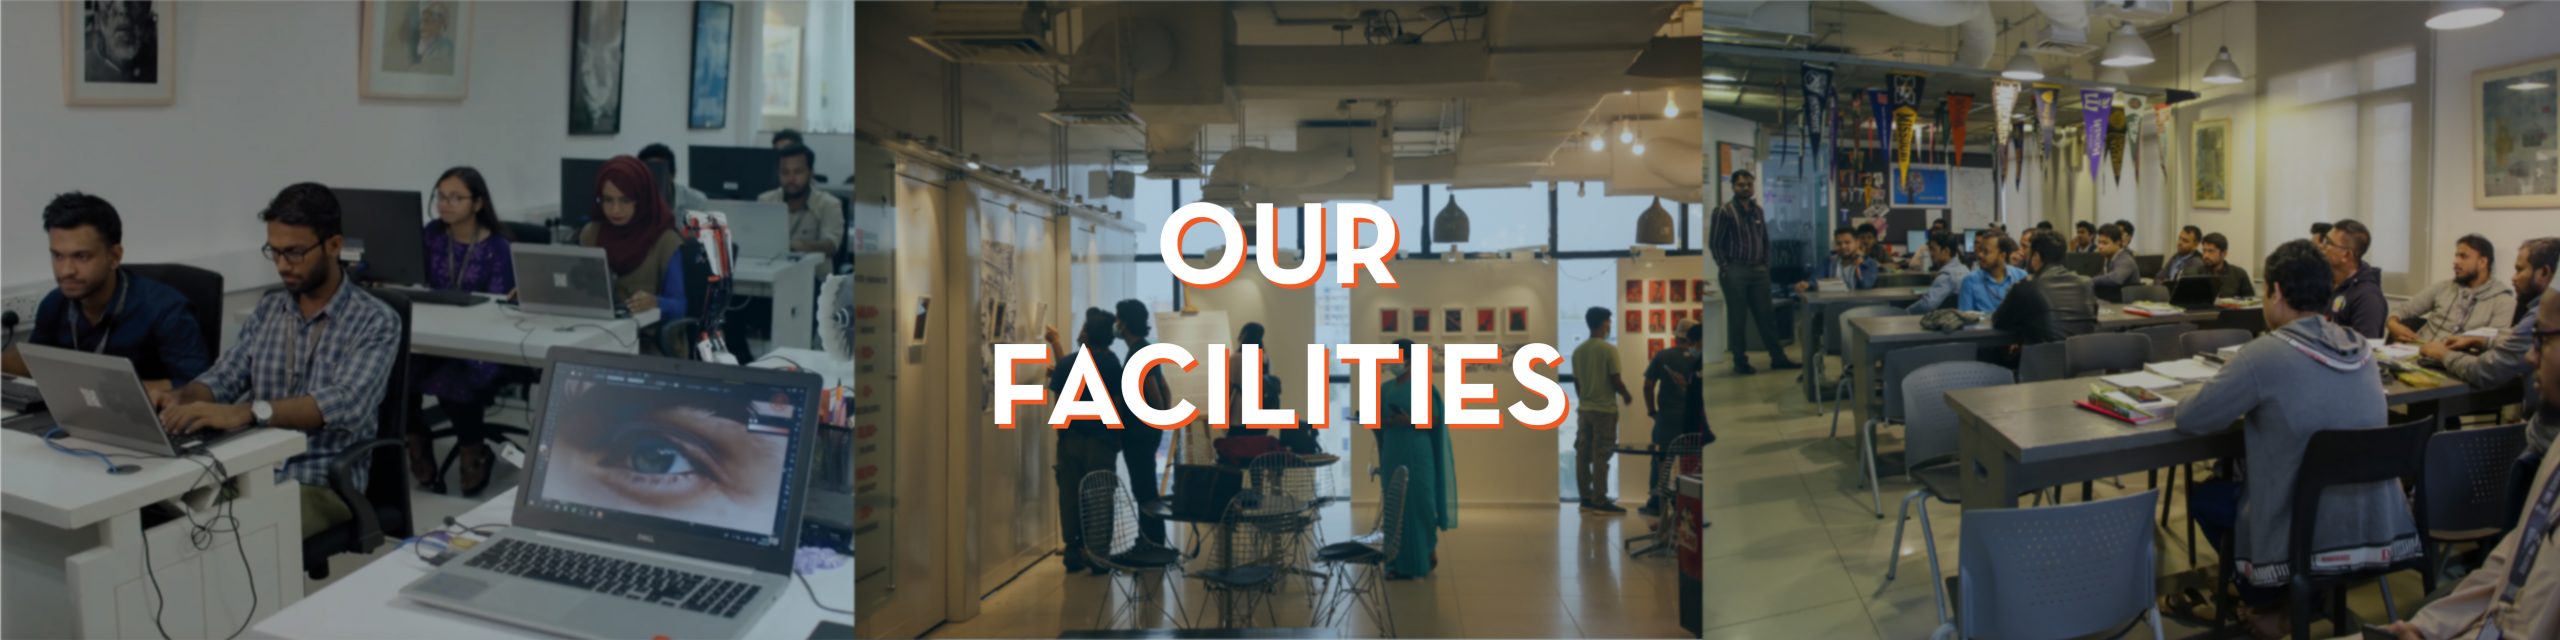 Our Facilities